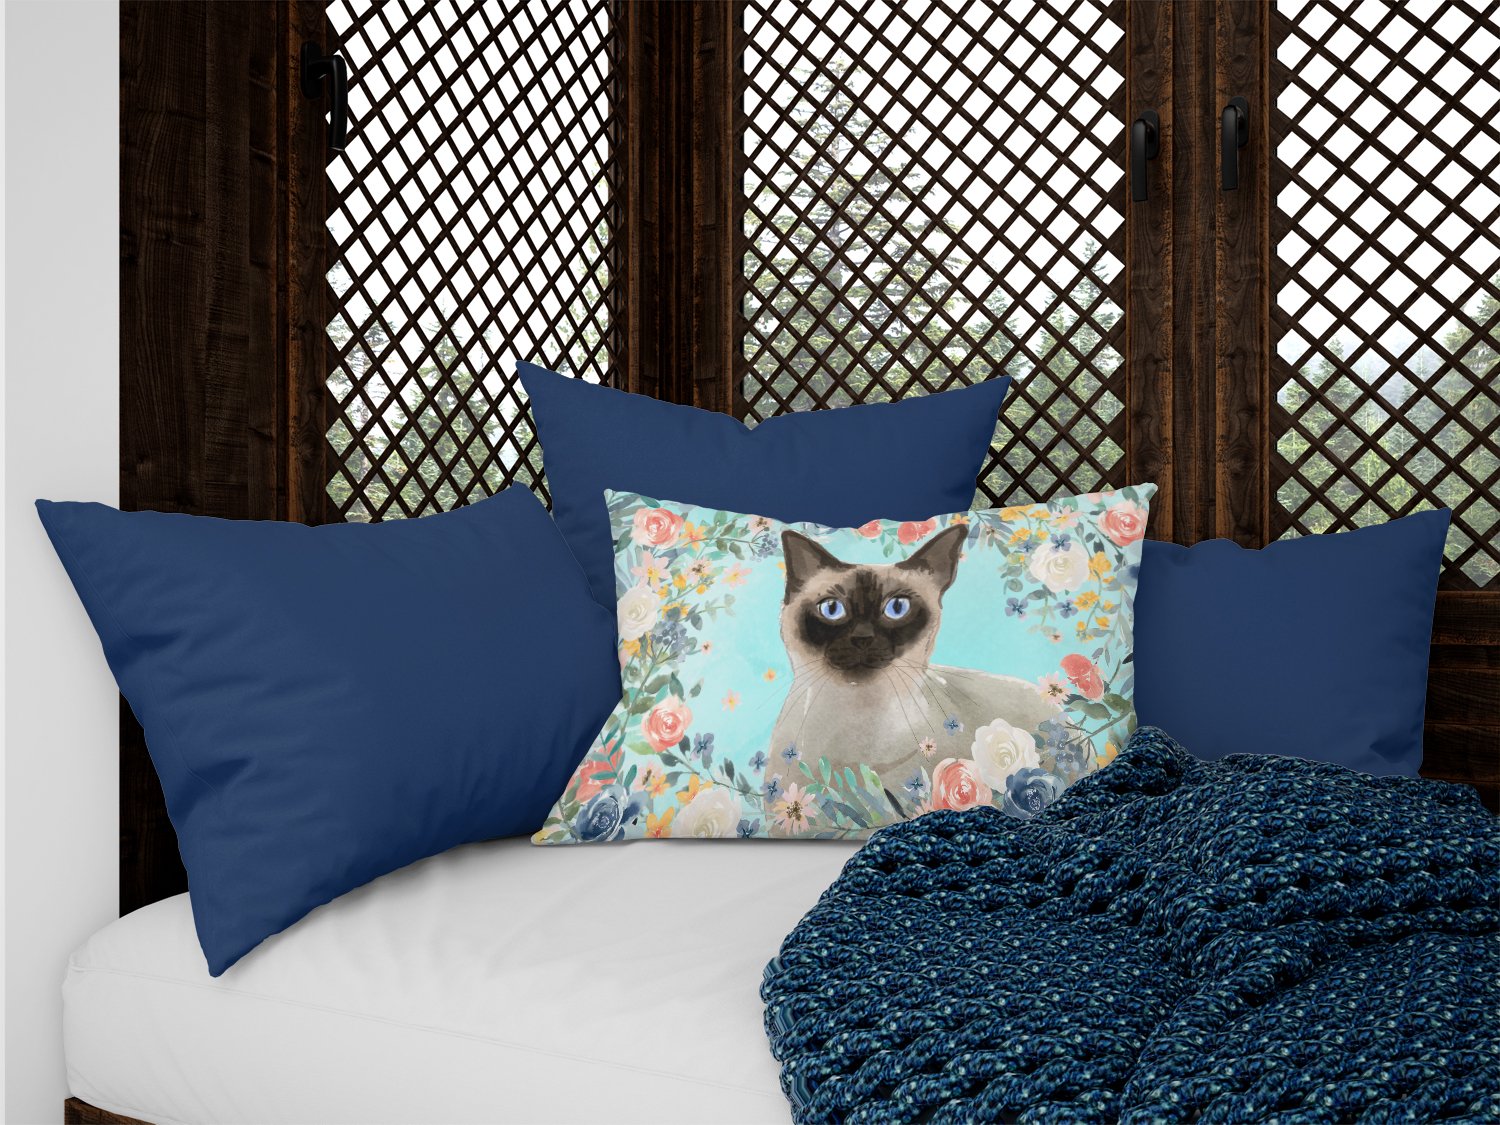 Siamese Spring Flowers Canvas Fabric Decorative Pillow CK3398PW1216 by Caroline's Treasures